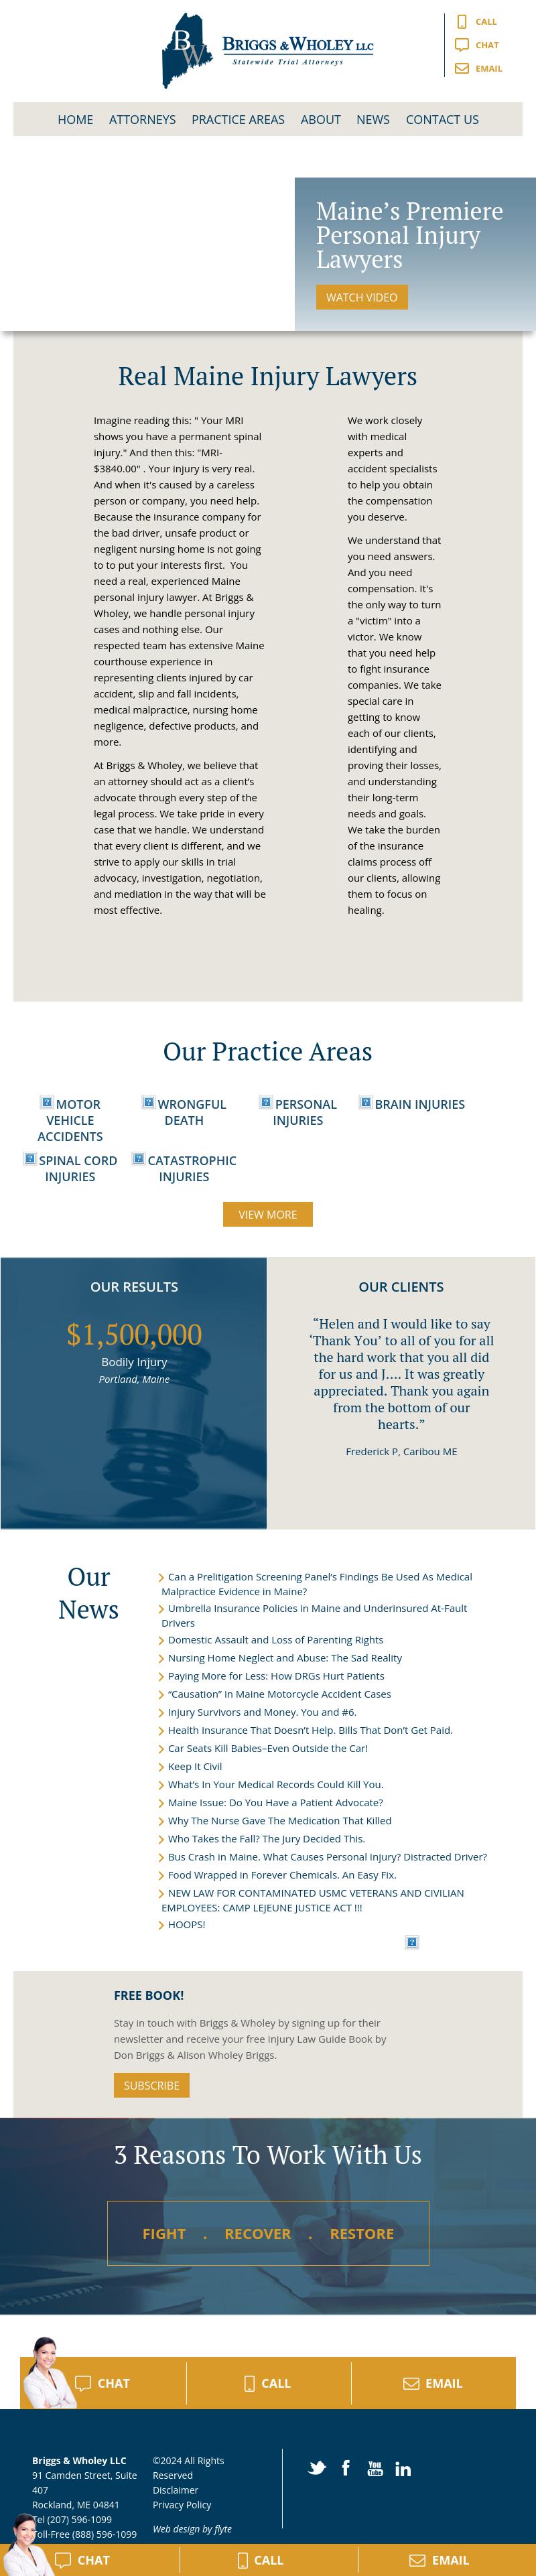 Briggs & Wholey LLC  -  Statewide Personal Injury Trial Attorneys - Rockport ME Lawyers